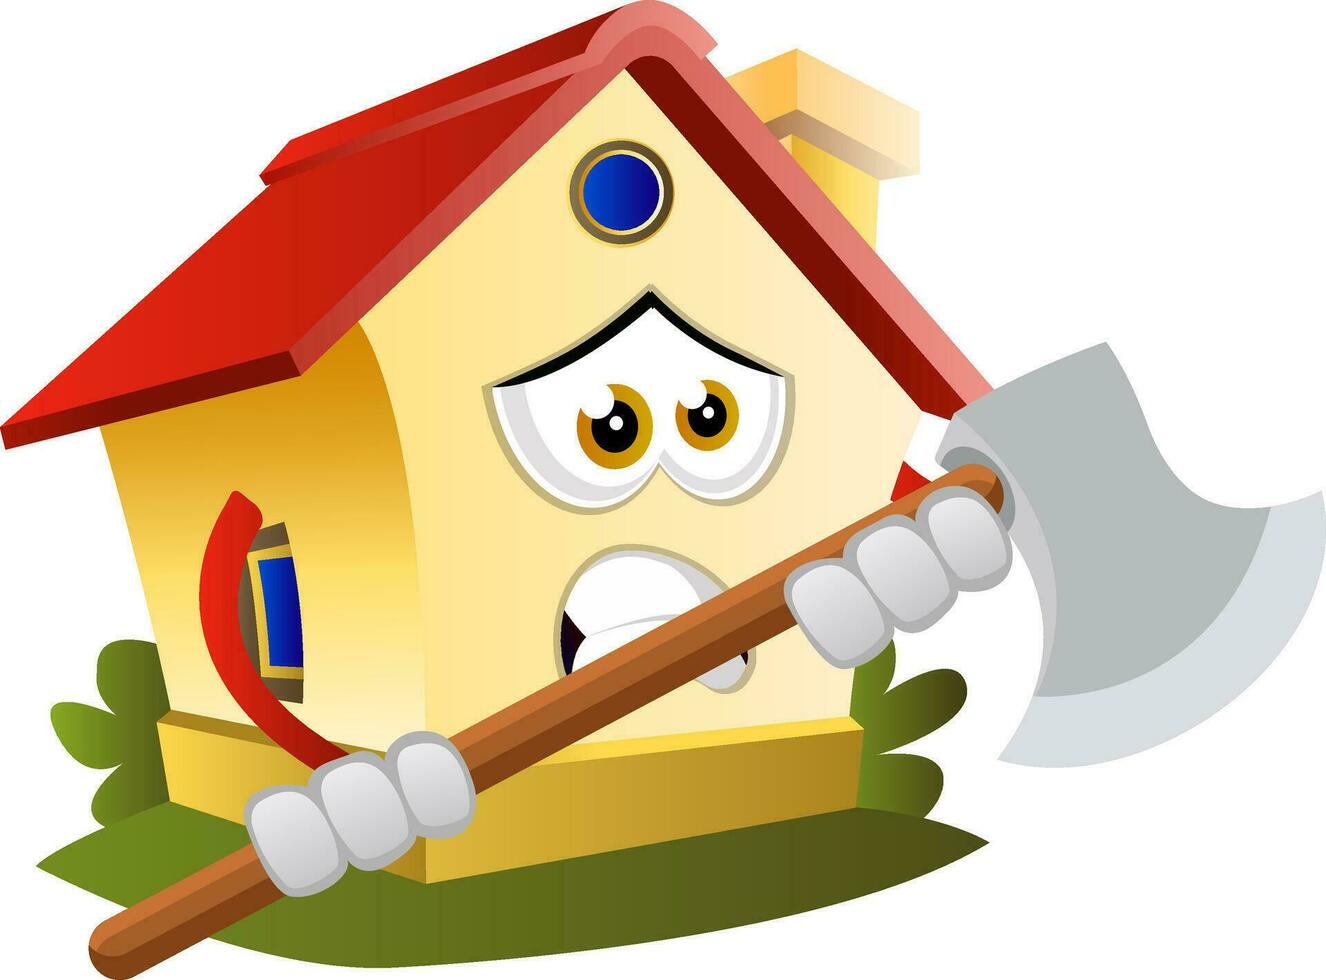 House is holding an axe, illustration, vector on white background.